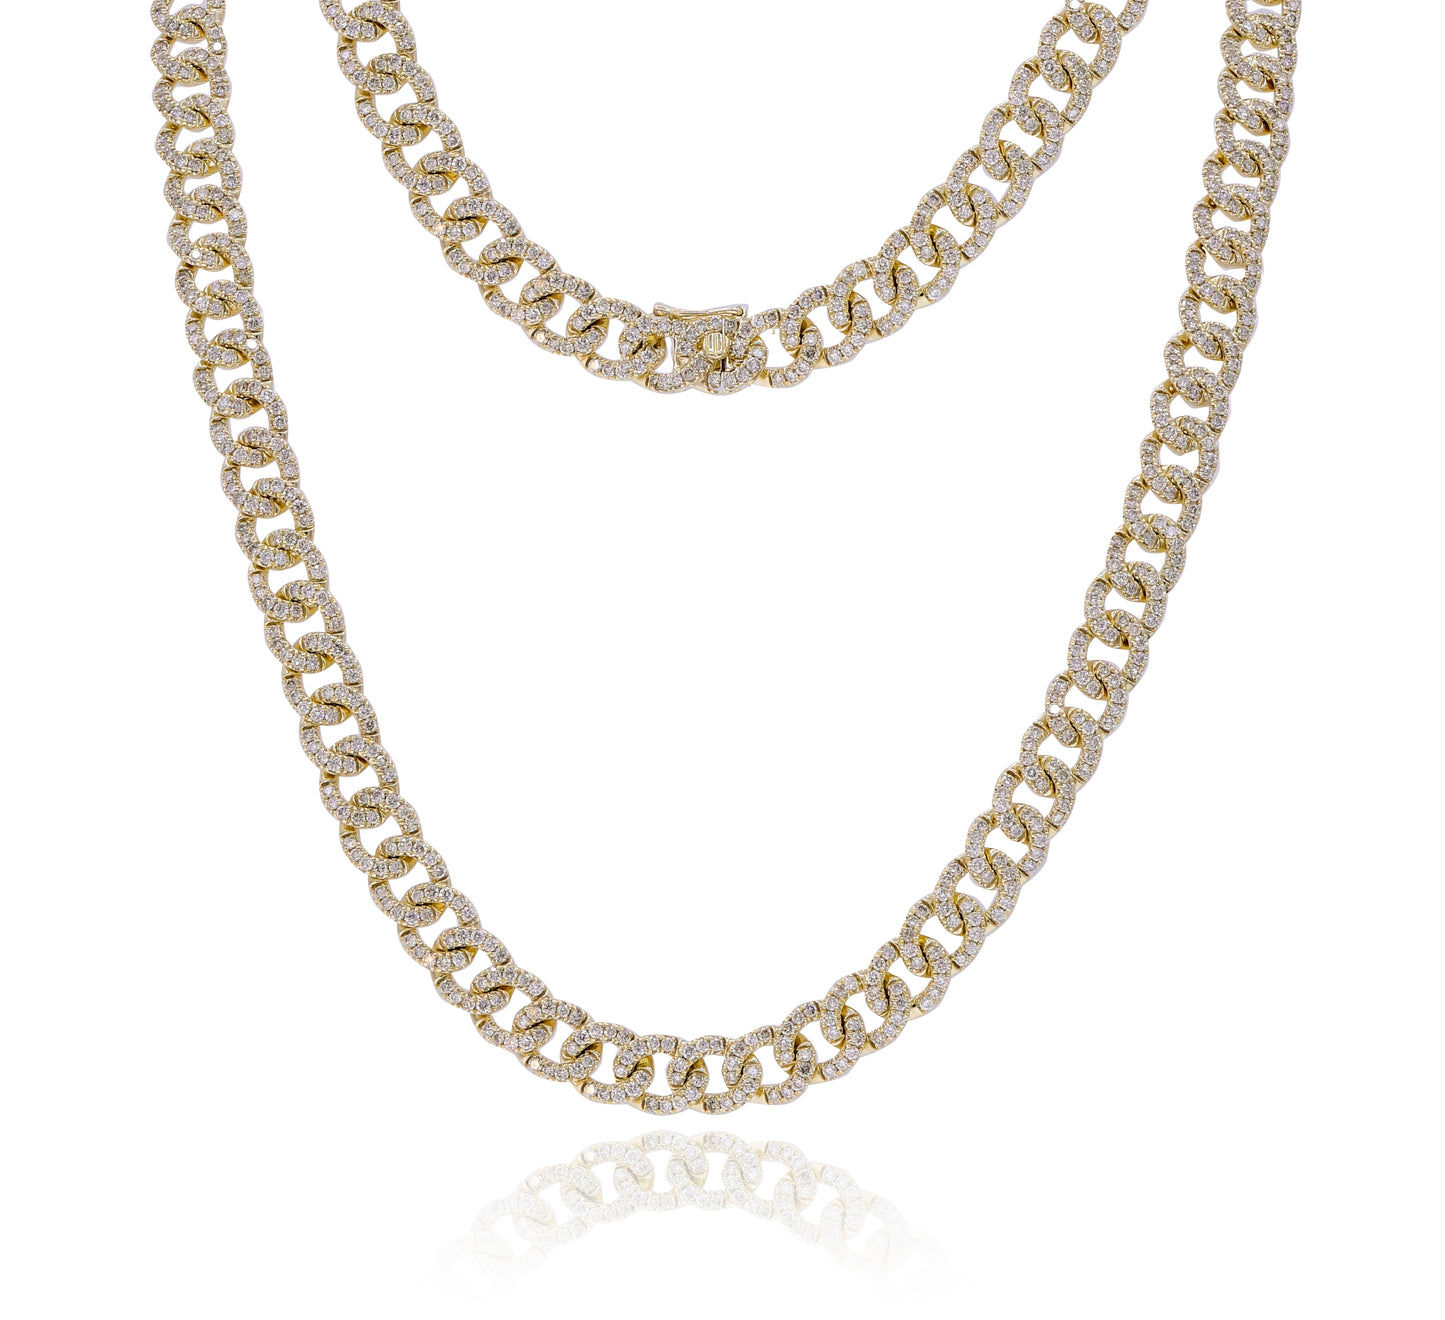 8.25ct Diamond Cuban Link Necklace in 14K Yellow Gold